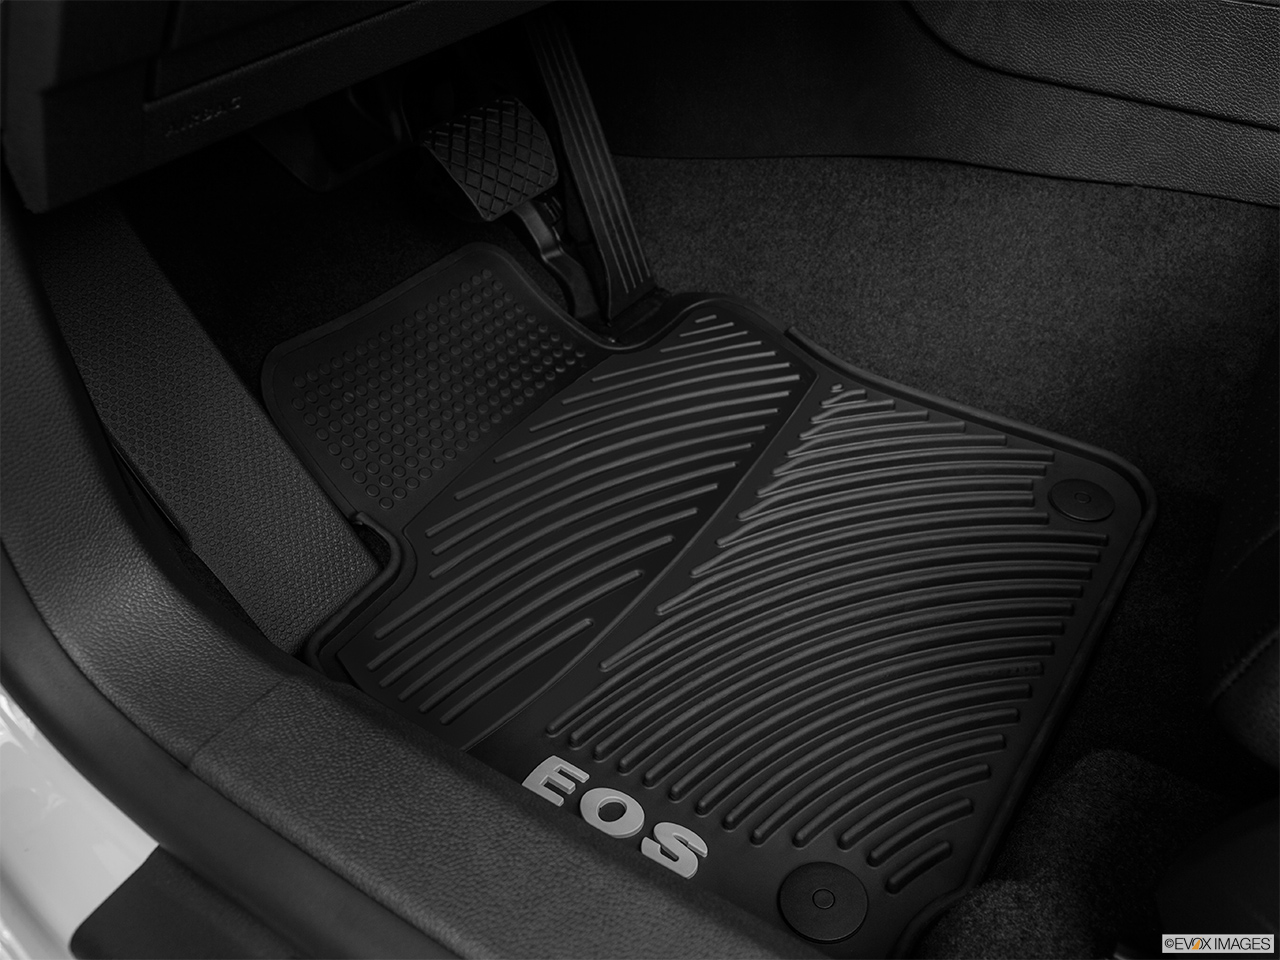 2014 Volkswagen Eos Komfort Driver's floor mat and pedals. Mid-seat level from outside looking in. 